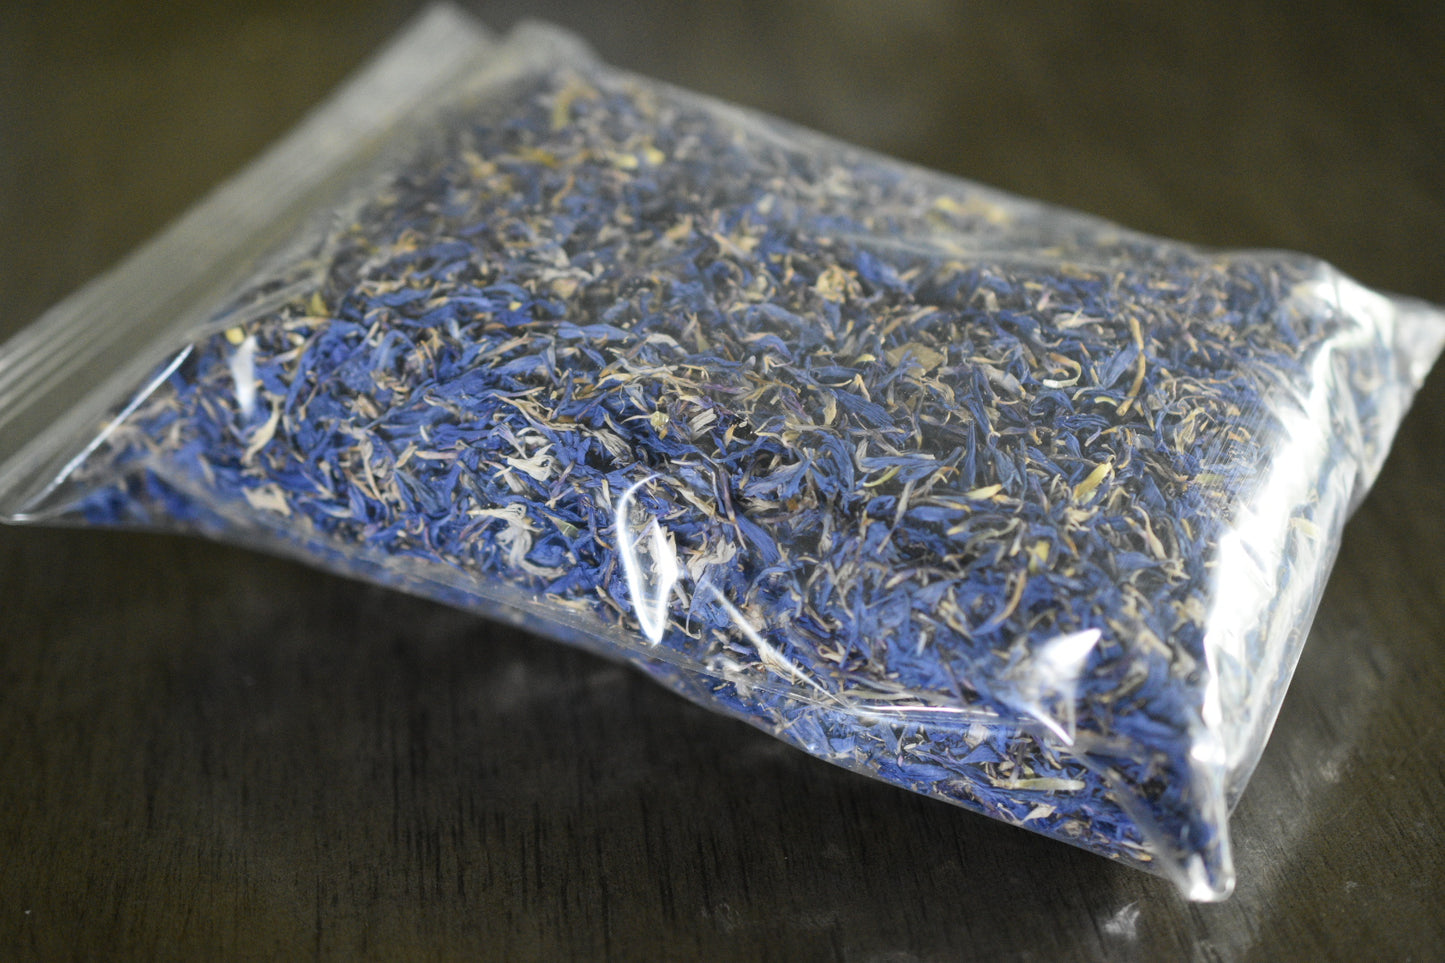 A close up view of 1 ounce of packaged blue cornflowers in a plastic bag with no label.